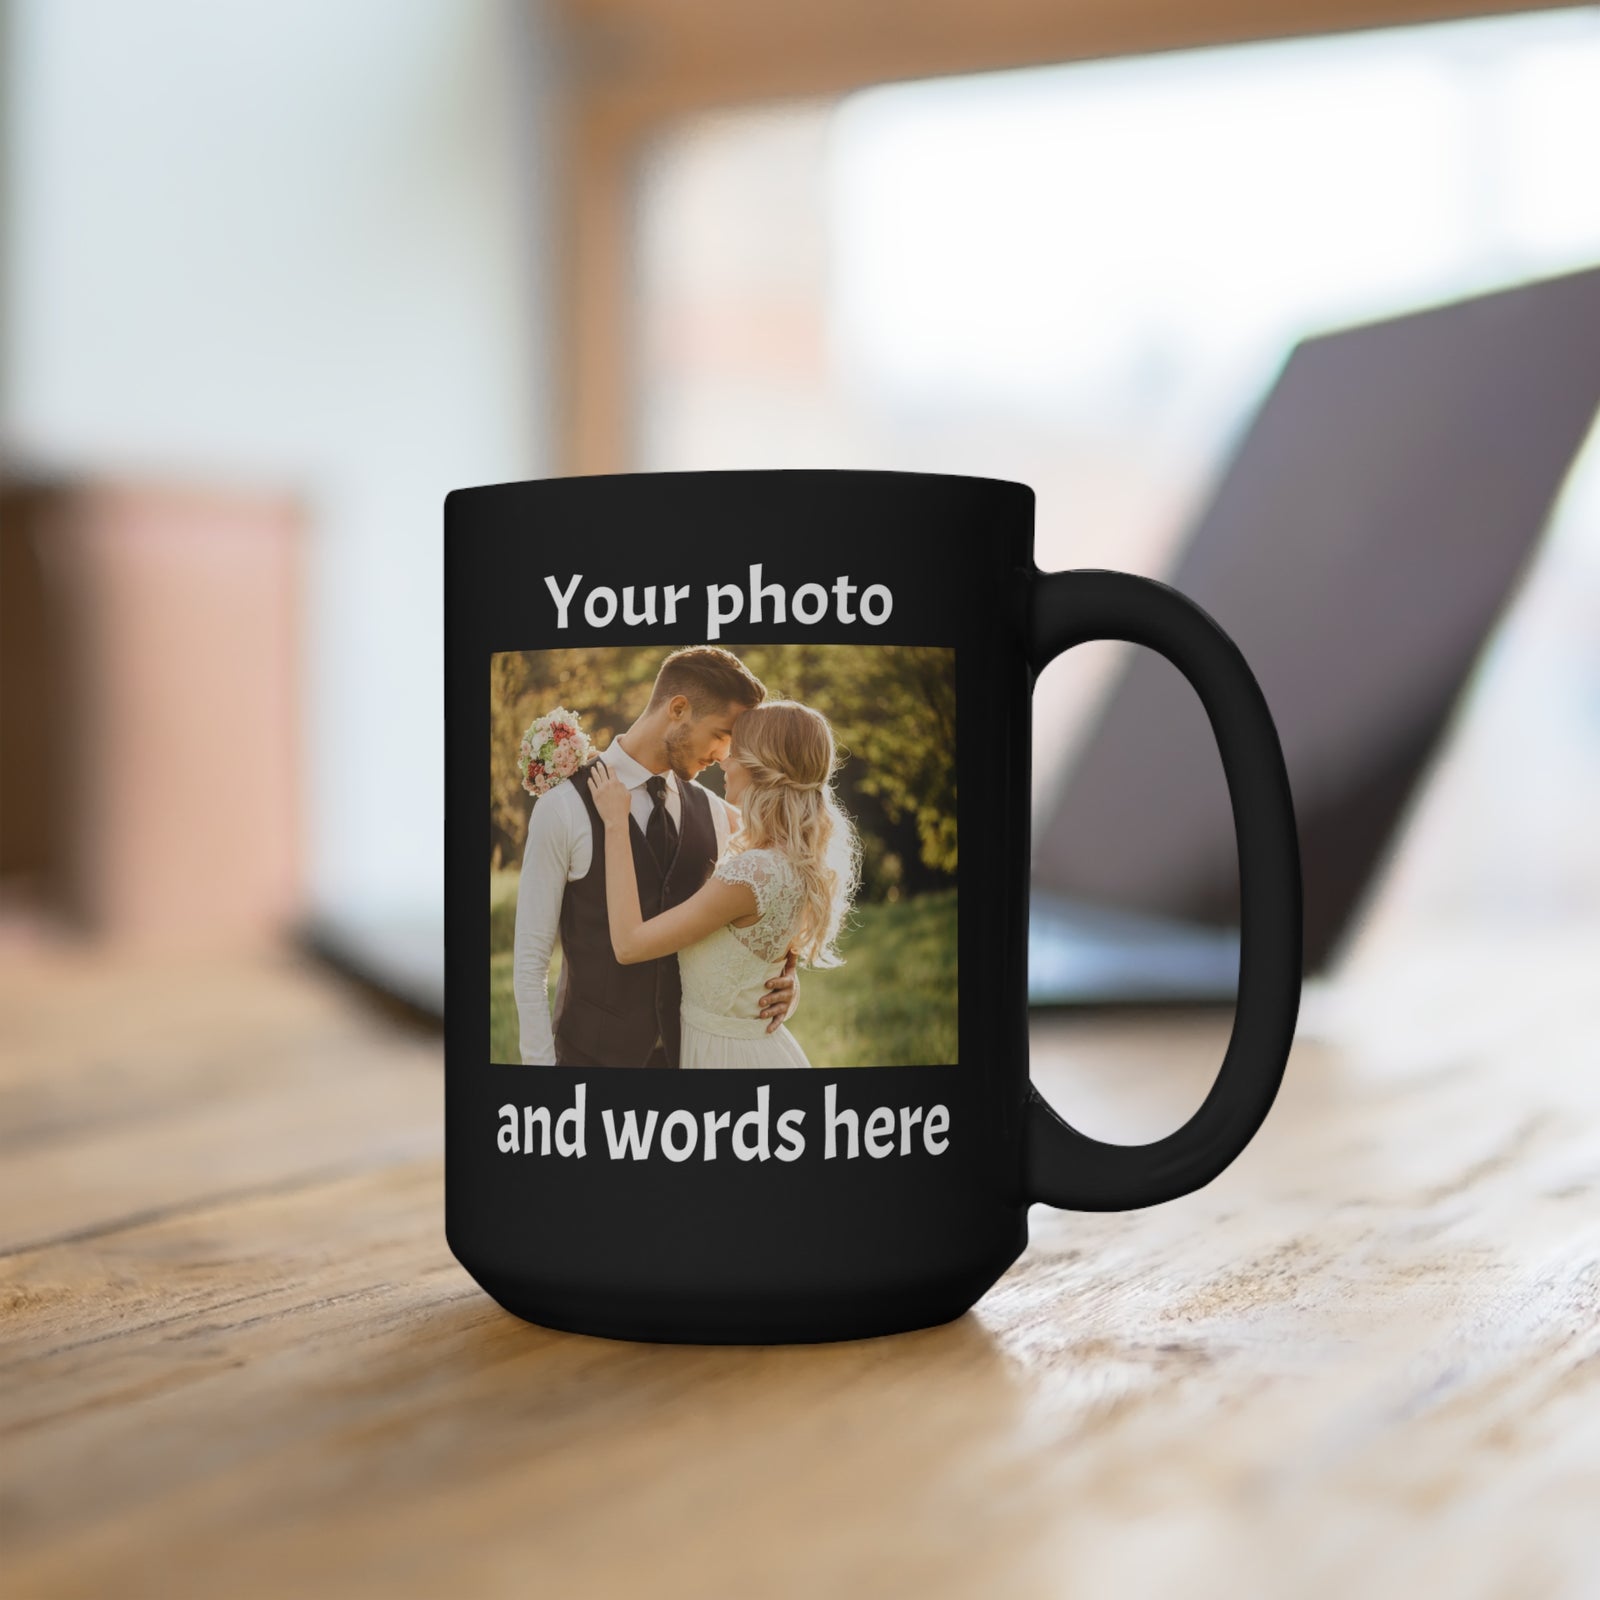 Personalized Photo Coffee Mug: The Perfect Blend of Memories and Warmth